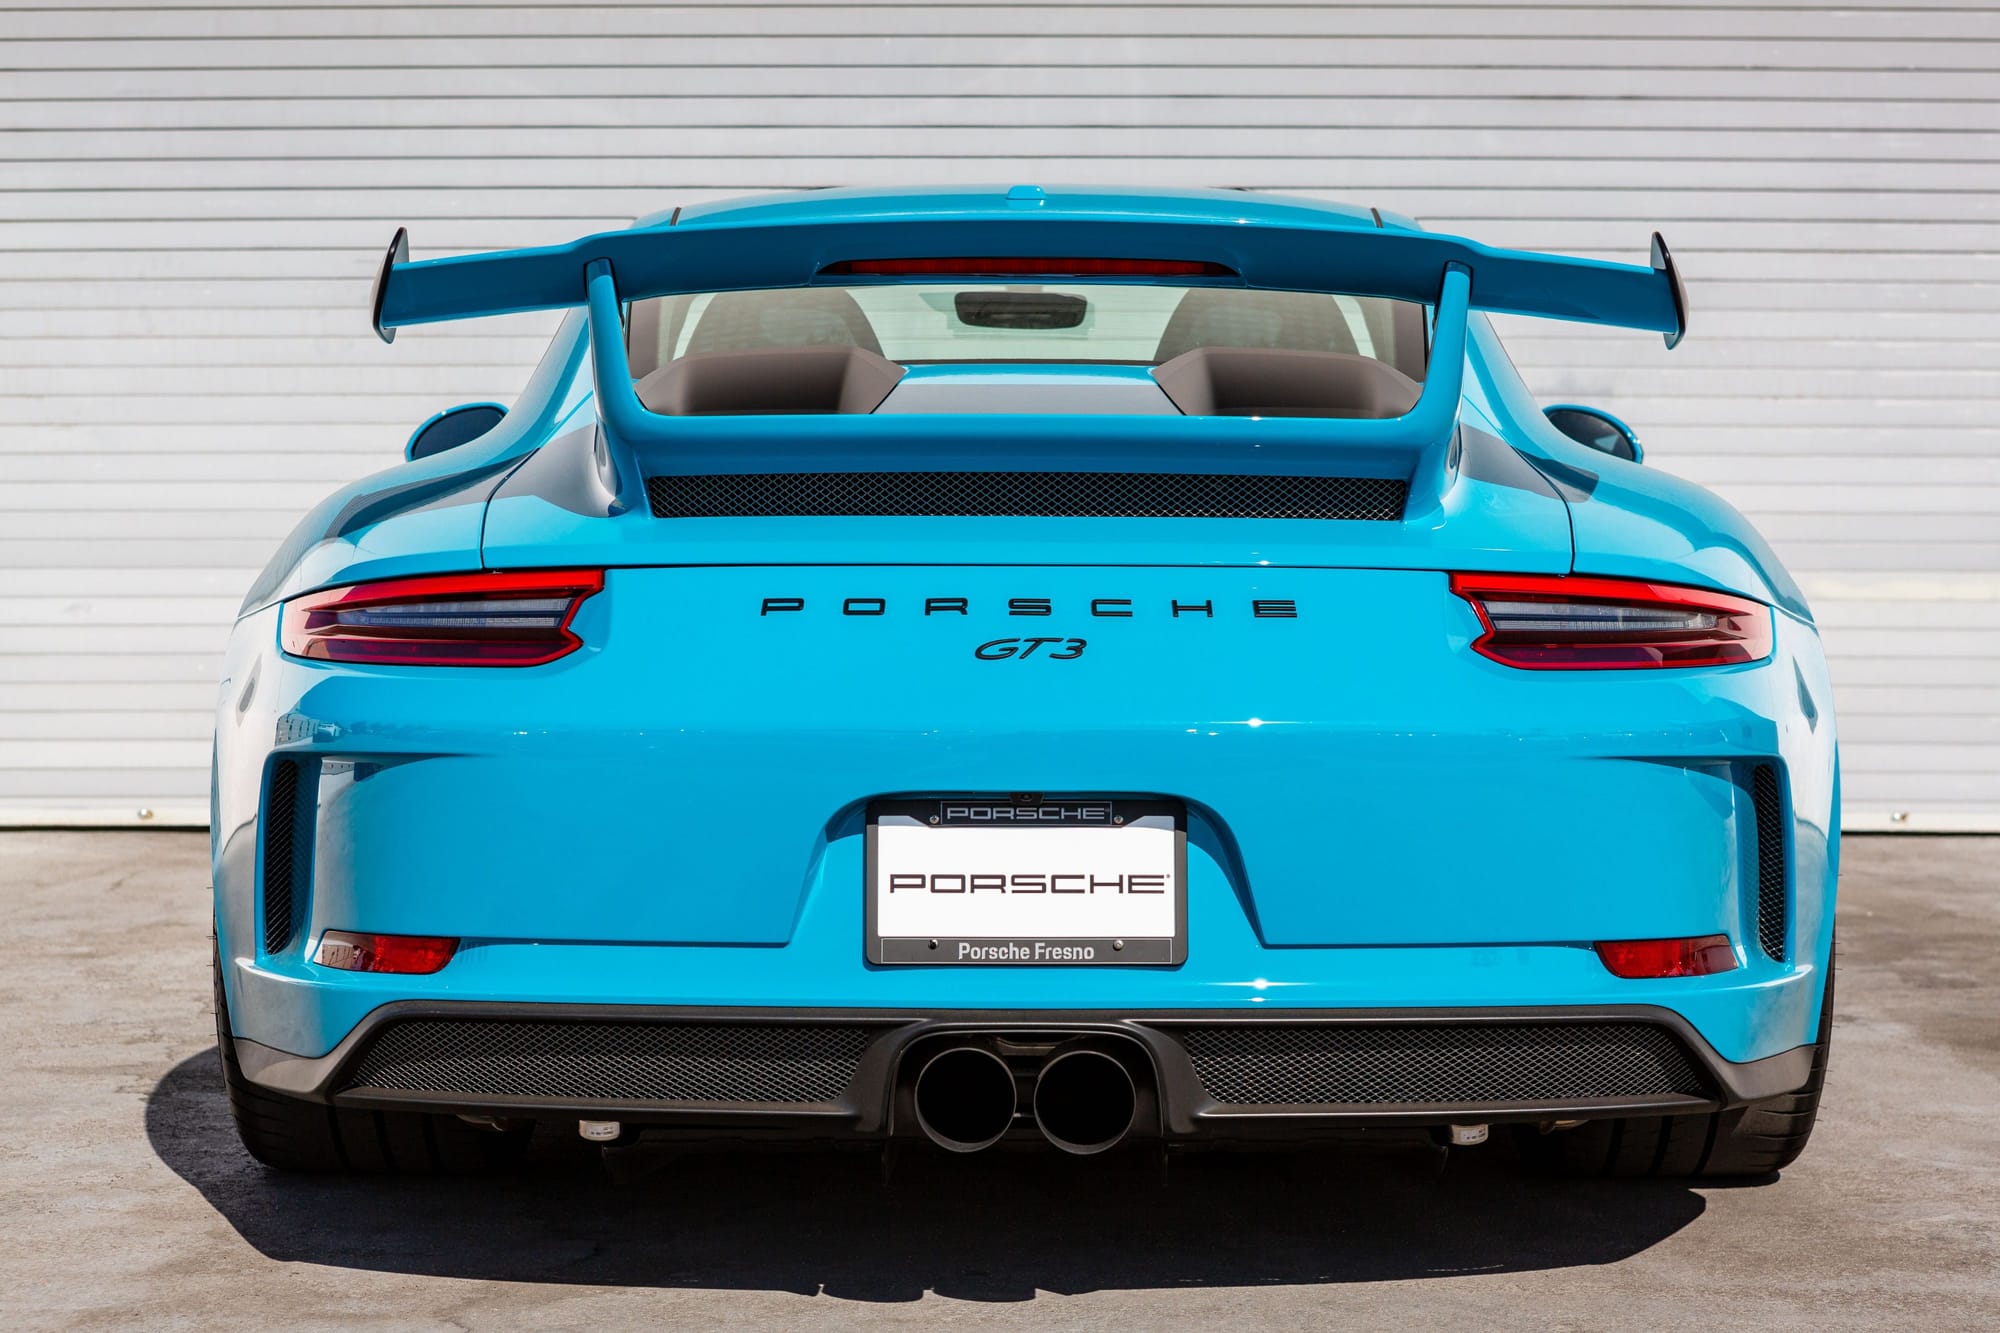 2018 Porsche GT3 - Miami Blue 991.2 GT3 w/ CPO - Used - VIN WP0AC2A99JS174630 - 2,315 Miles - 6 cyl - 2WD - Automatic - Coupe - Blue - Fresno, CA 93650, United States